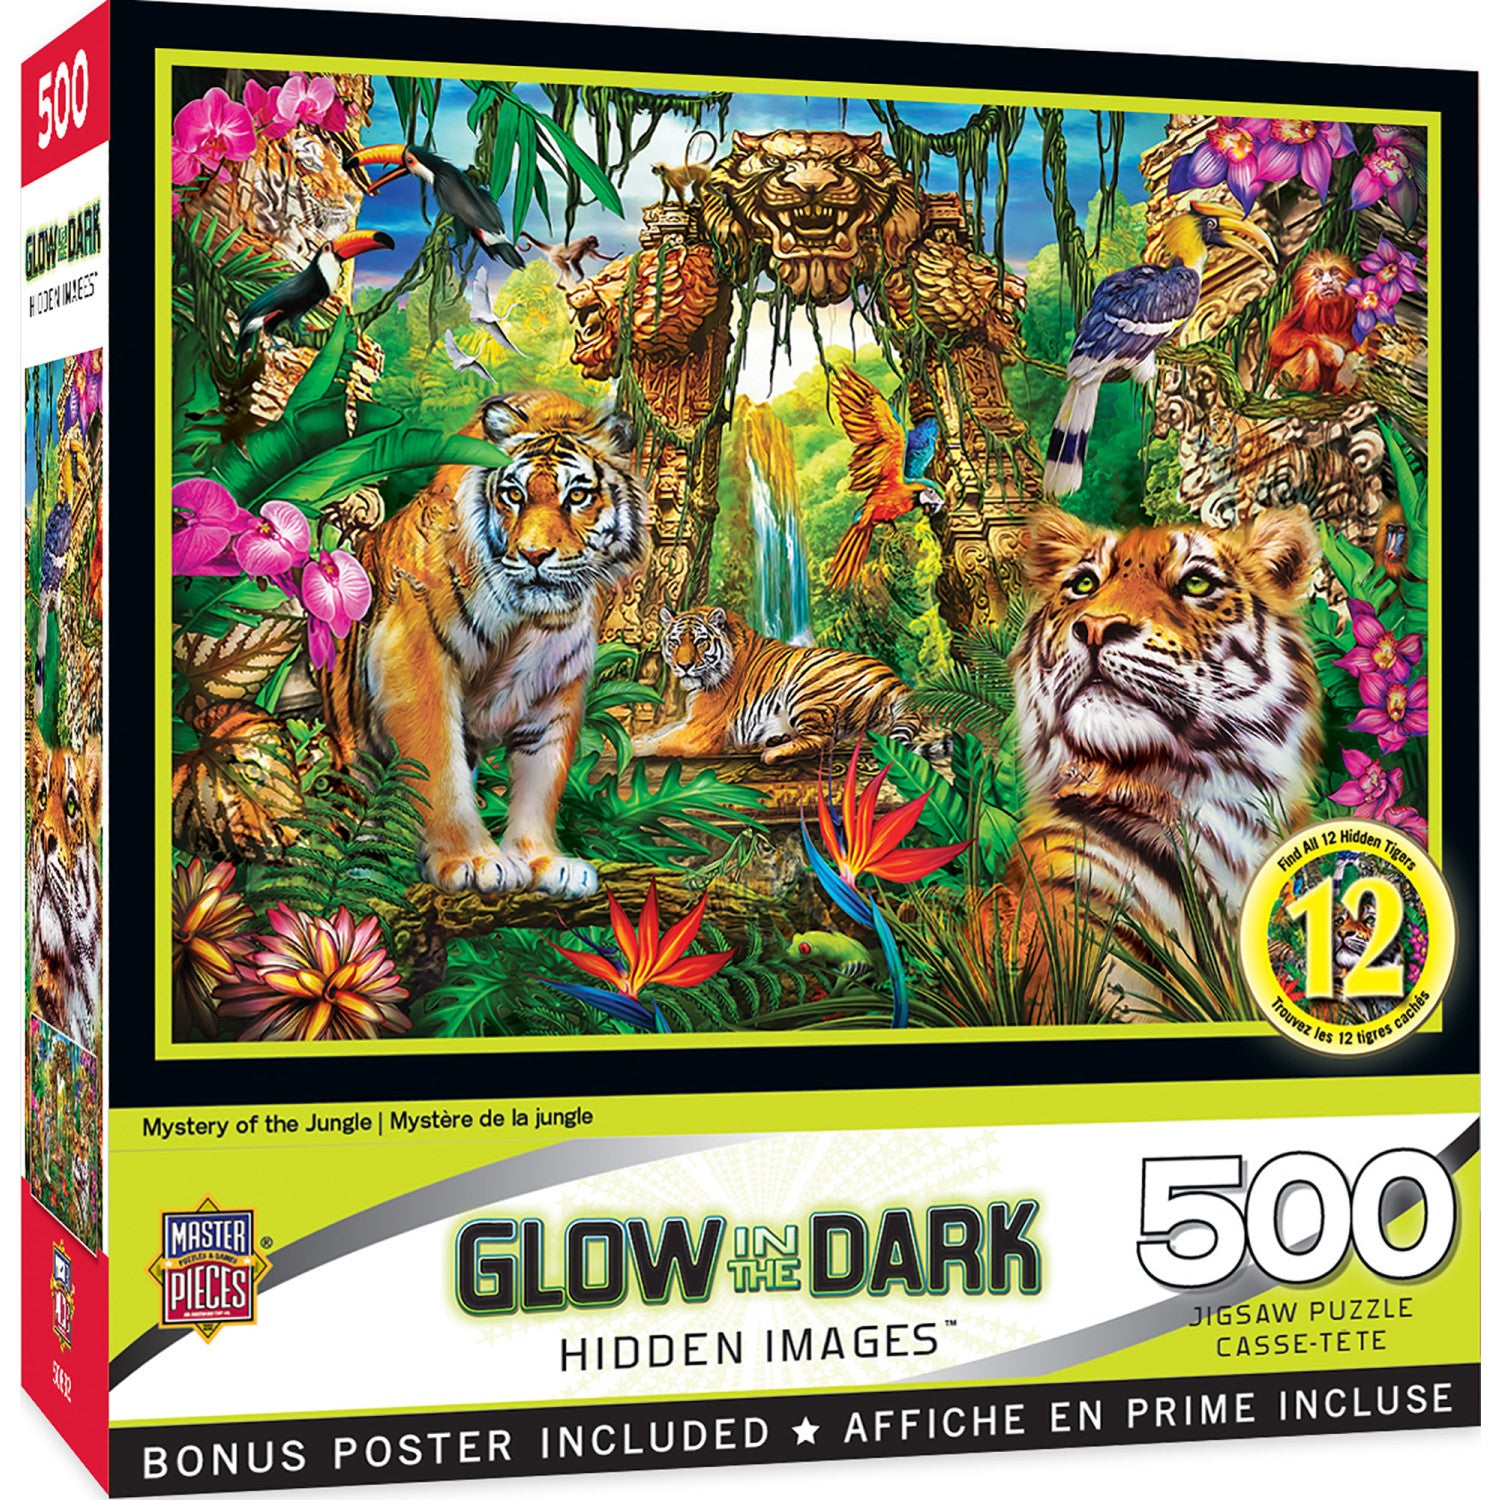 Hidden Images - Mystery of the Jungle 500 Piece Jigsaw Puzzle